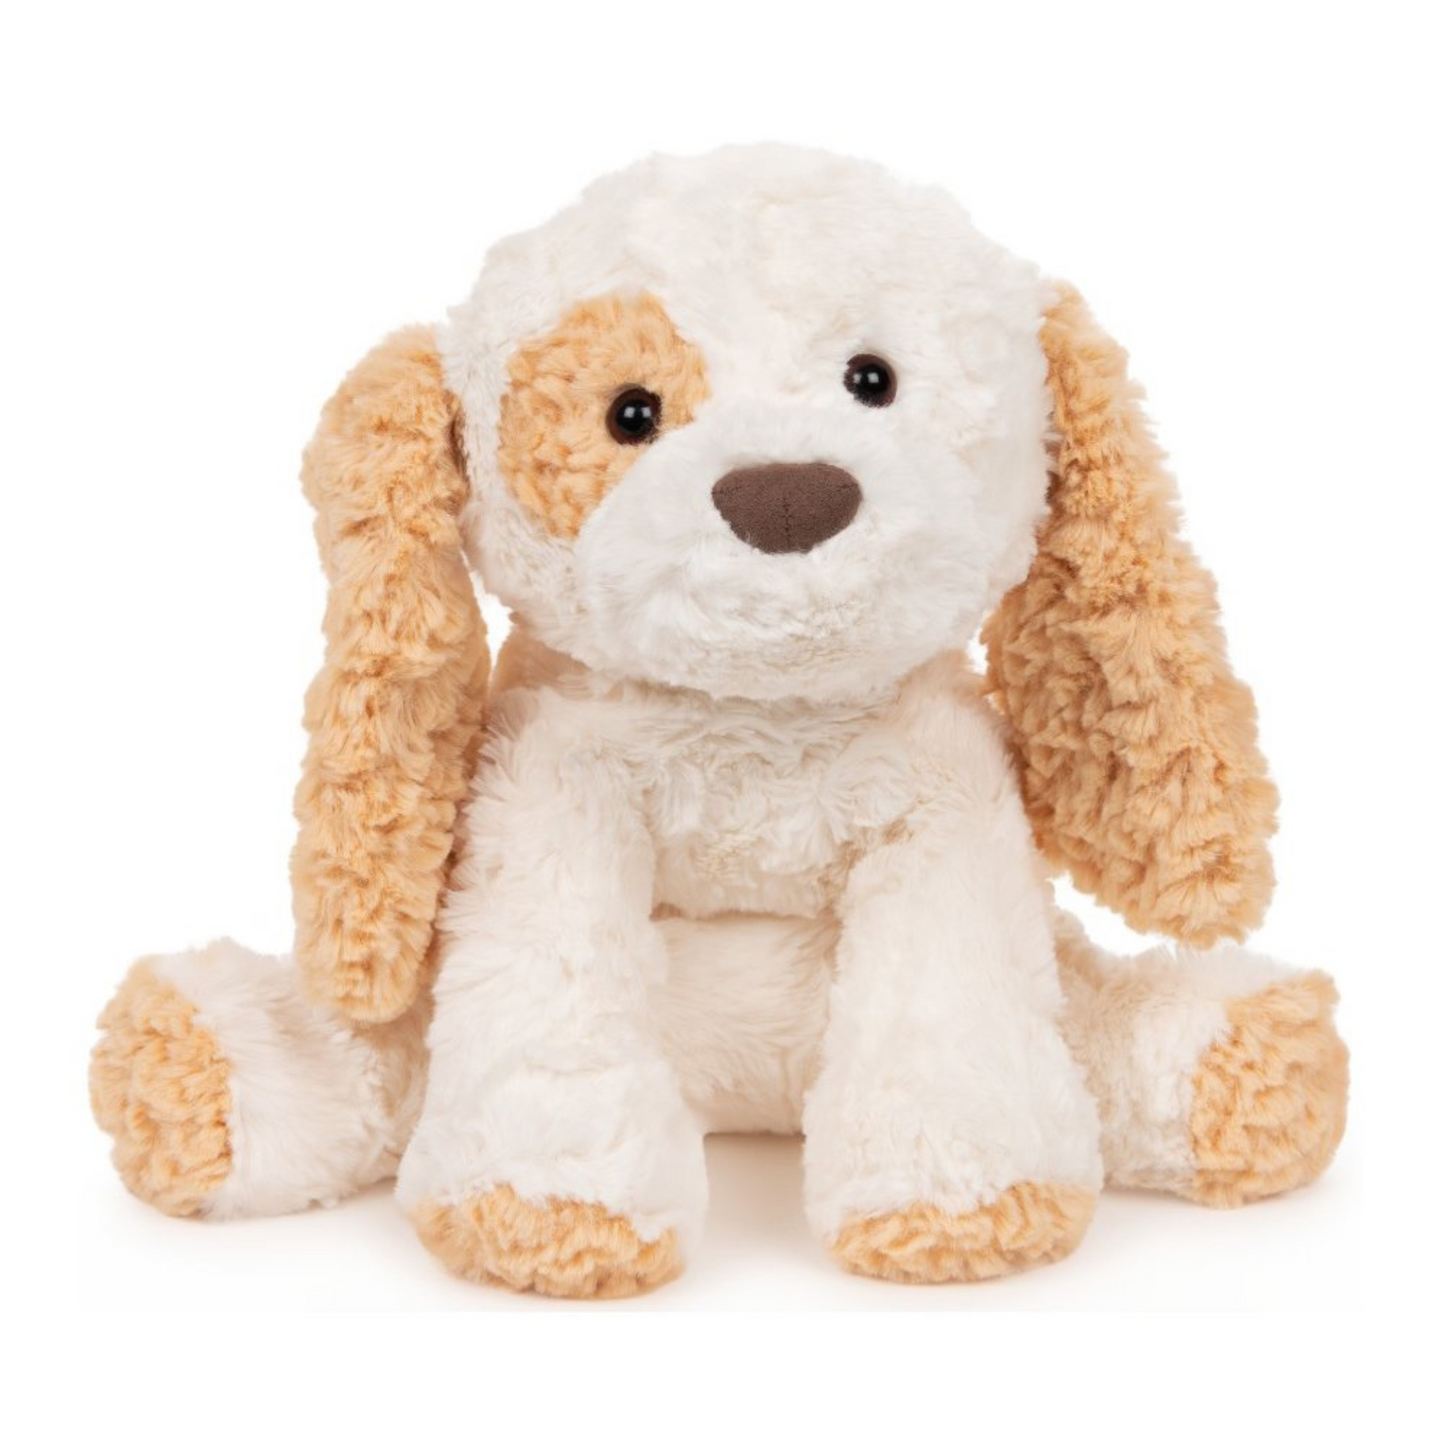 Personalized Gund Dog Plush with Name (10")